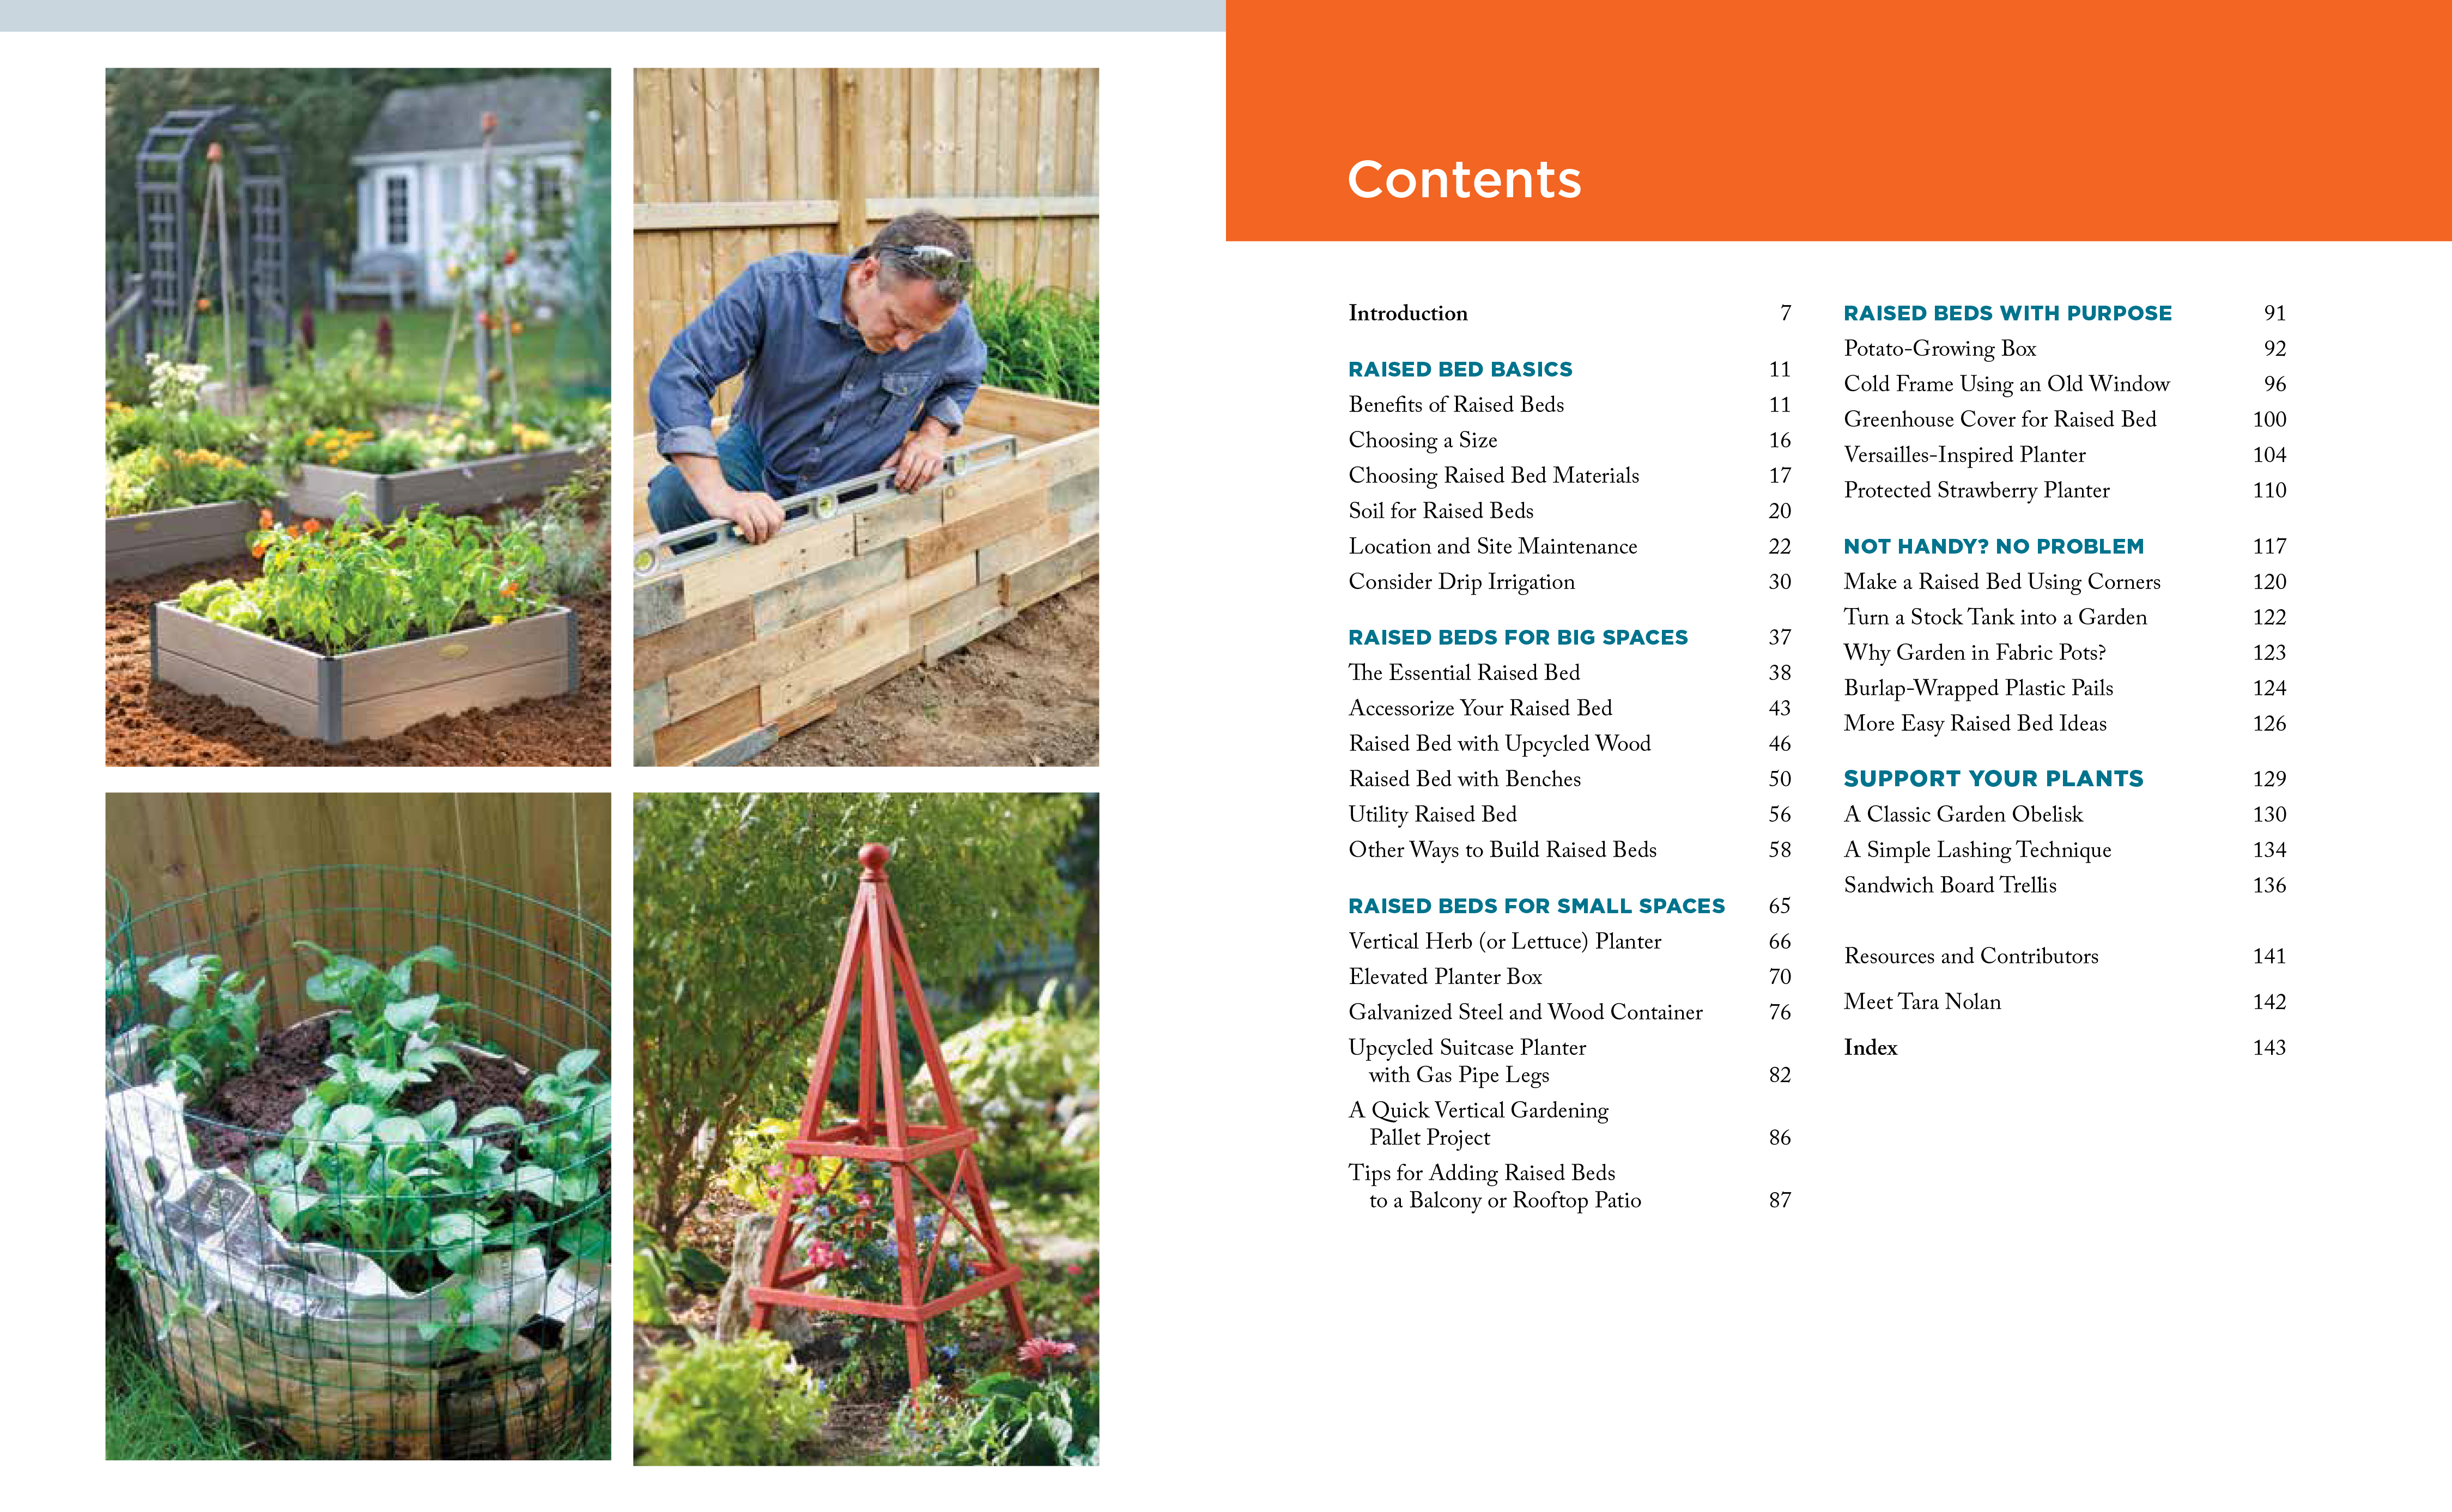 Raised Bed Gardening: A Complete Beginner's Guide